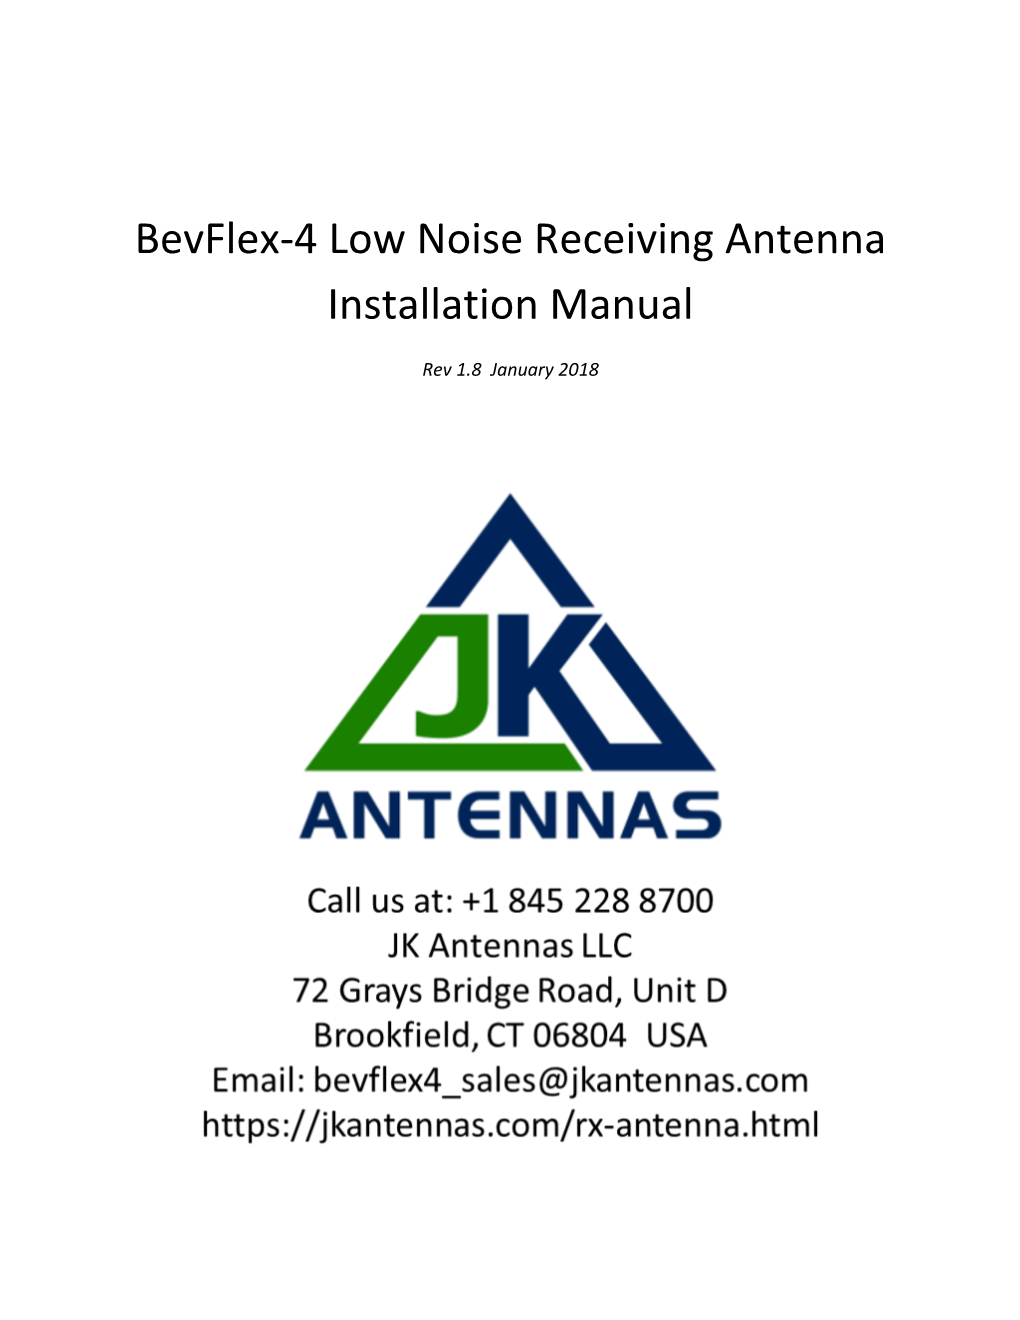 Bevflex-4 Low Noise Receiving Antenna Installation Manual